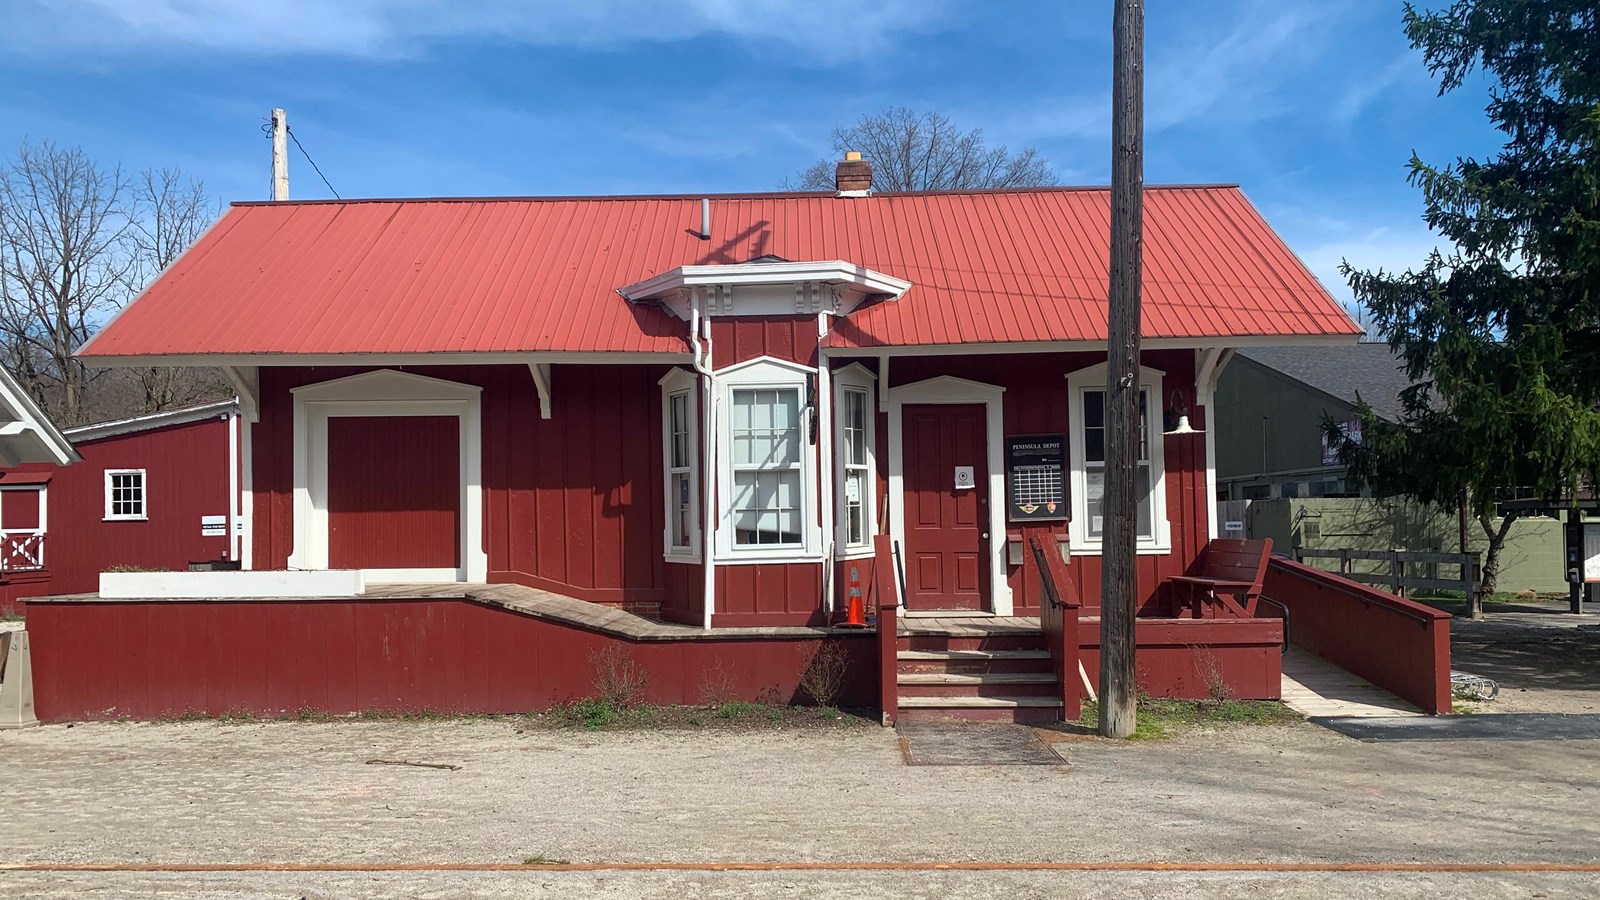 A red building with white trim. Depot has a platform, ramp, posted train schedule, and bay window.